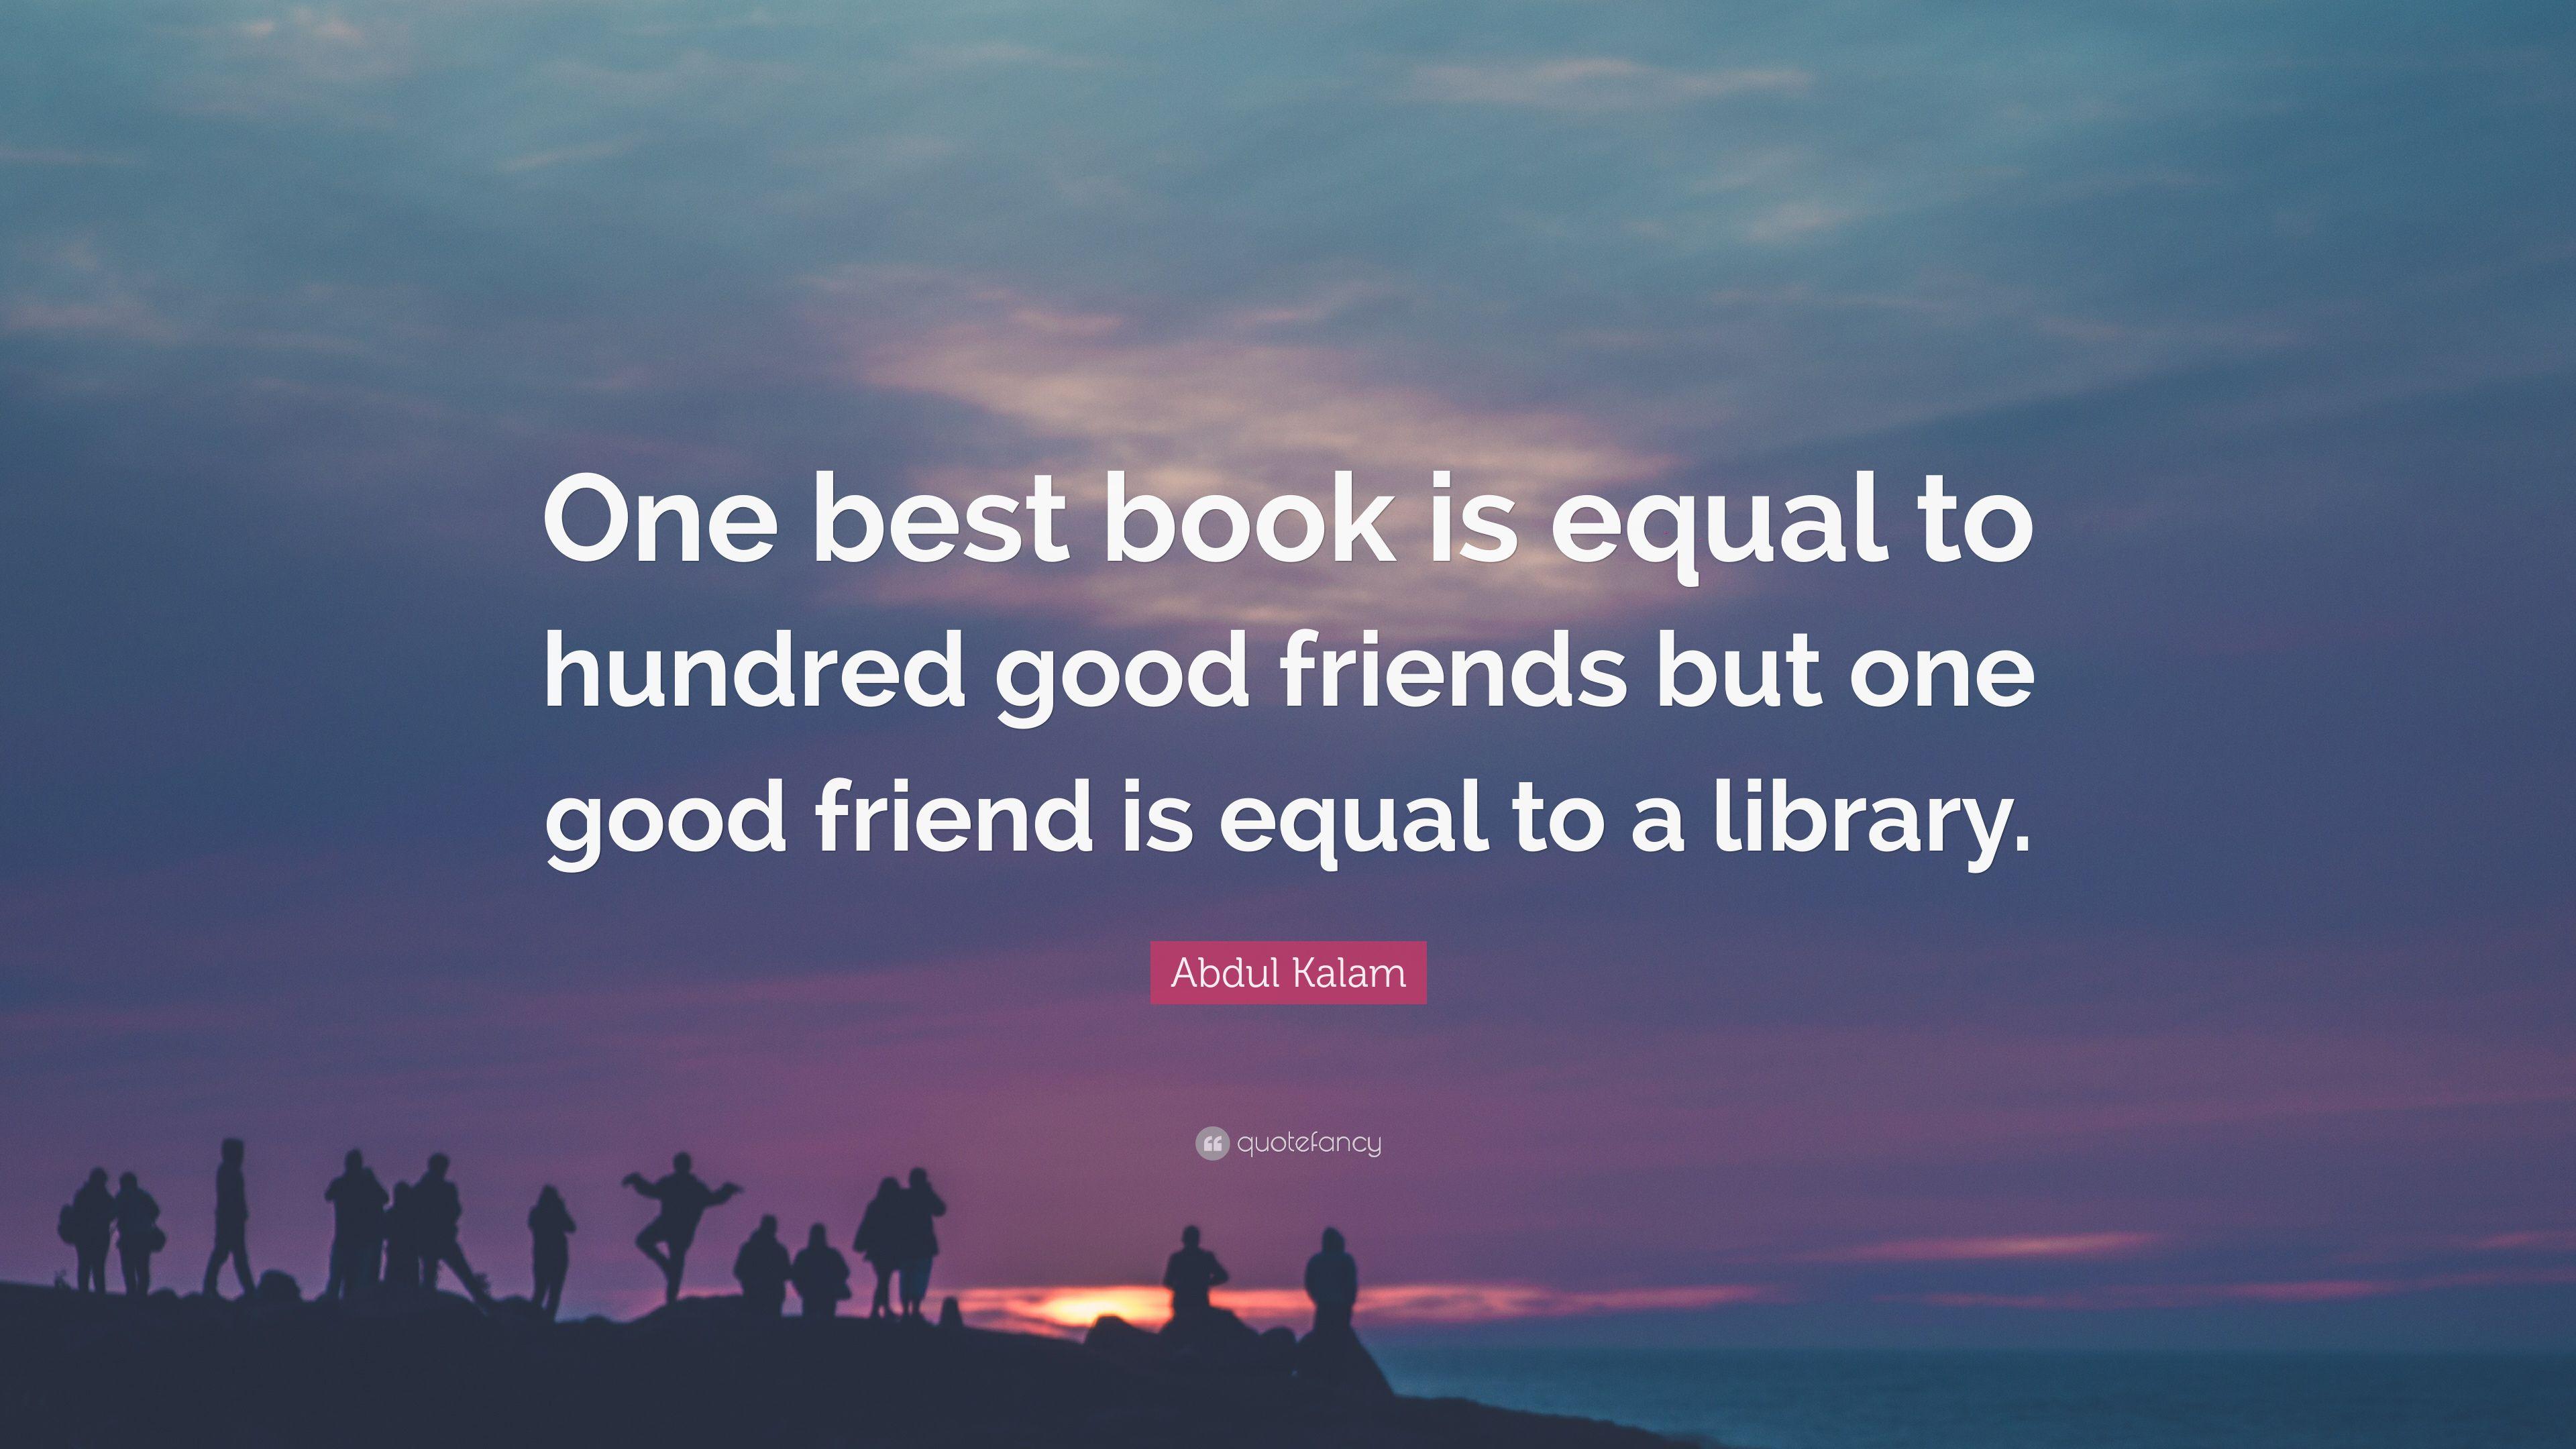 Abdul Kalam Quote: “One best book is equal to hundred good friends